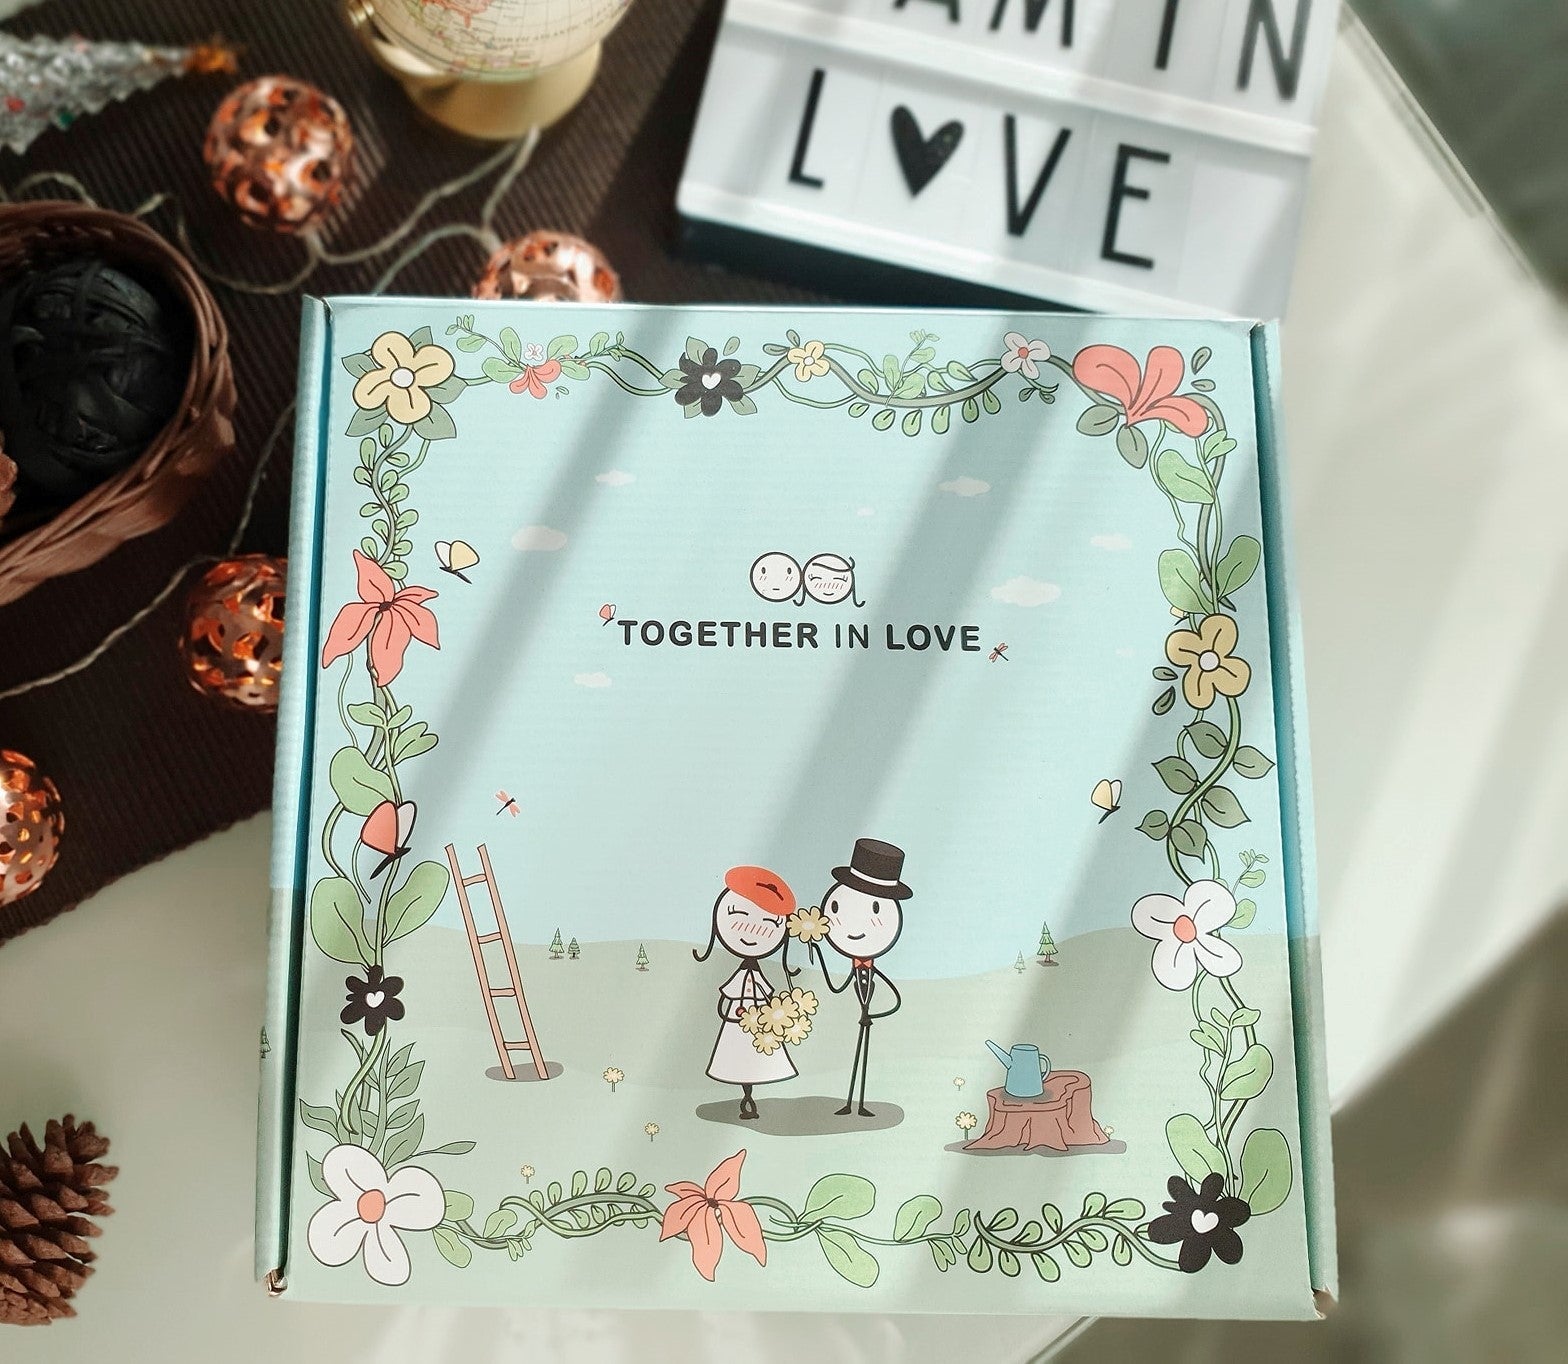 Together in love blank giftboxHome & GardenHuman Touch OfficialGift box size: 27x26x10.5 cm
Material: 3 ply cardboard paper
Gift box includes free gift card and decorate stencil paper 
Ideal for 1-2 boxes of pillowcases + one co